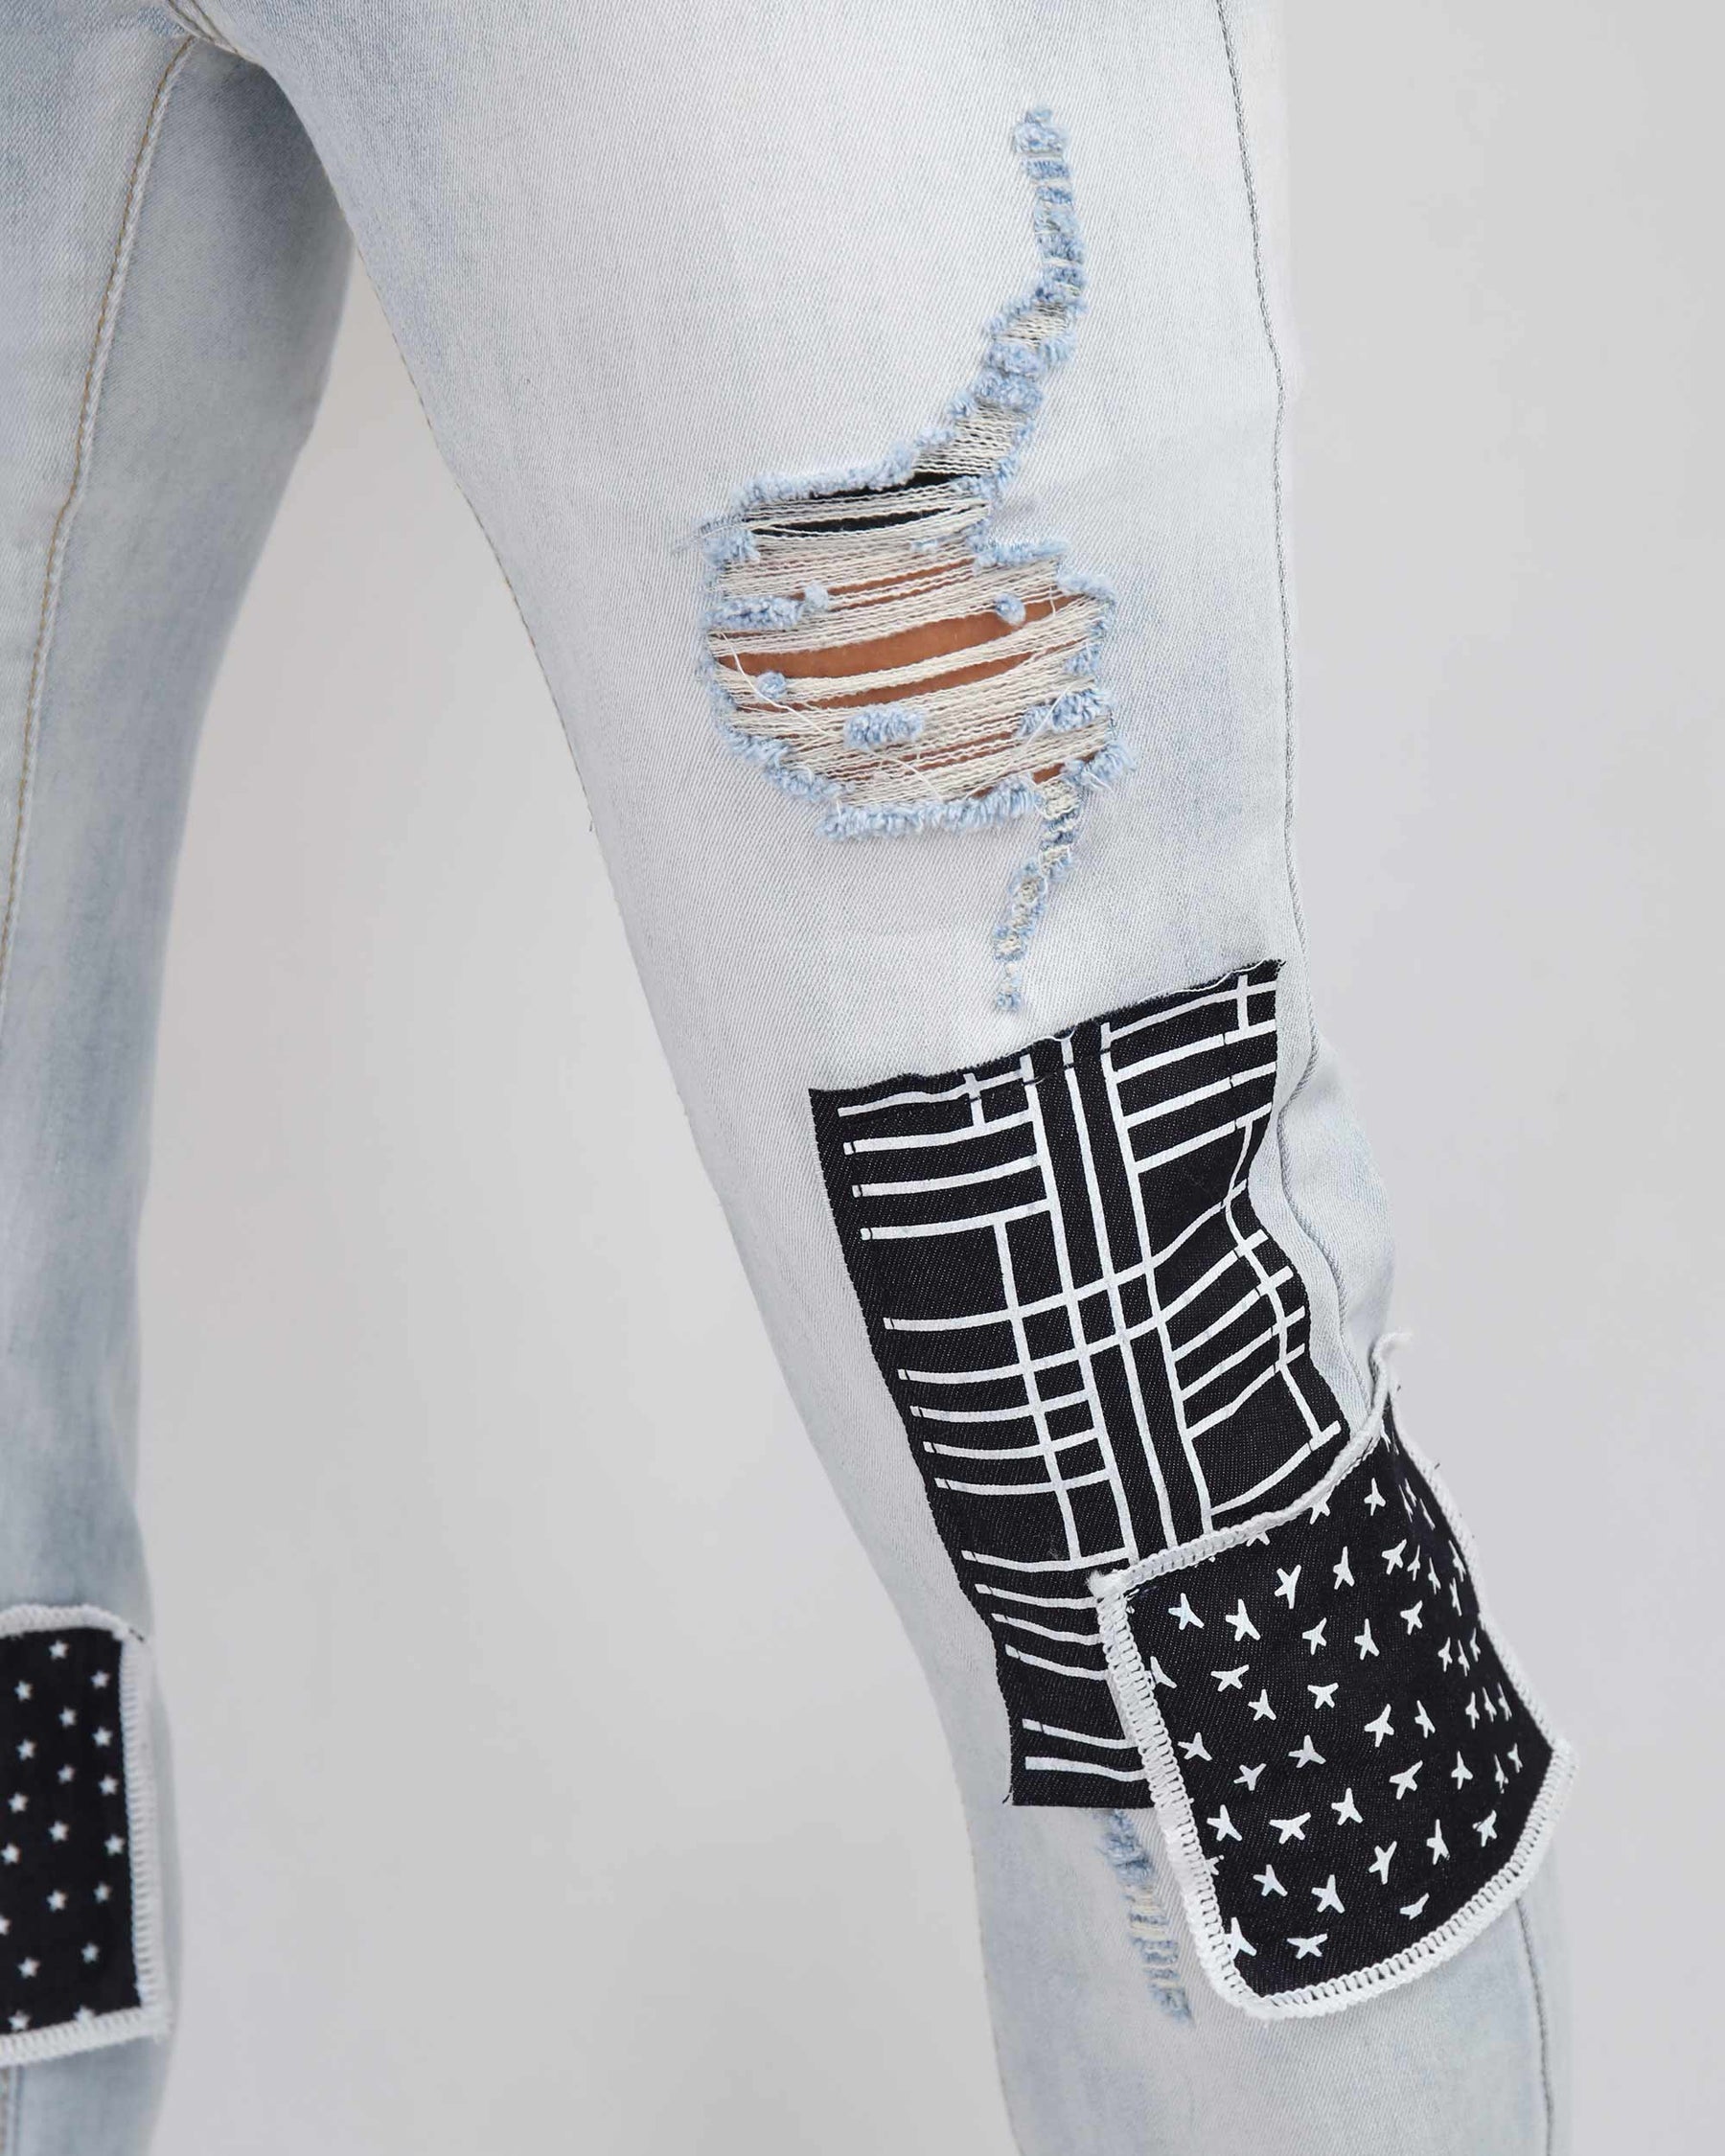 Blue Ripped Jeans with Striking Black Patches